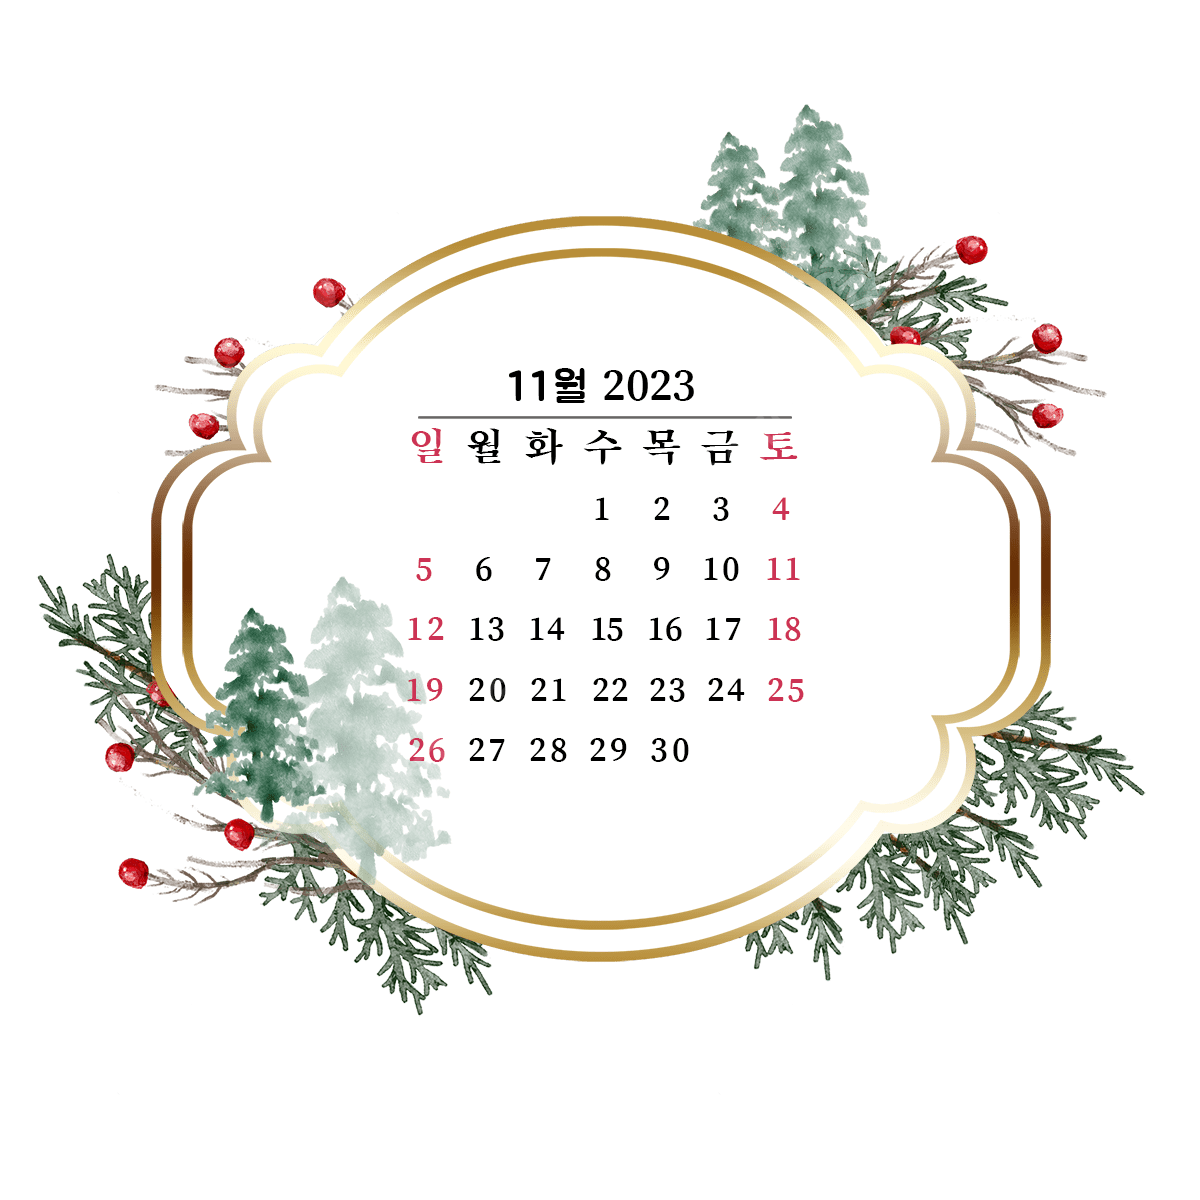 November 2023 Calendar PNG, Vector, PSD, and Clipart With Transparent Backgrounds for Free Download